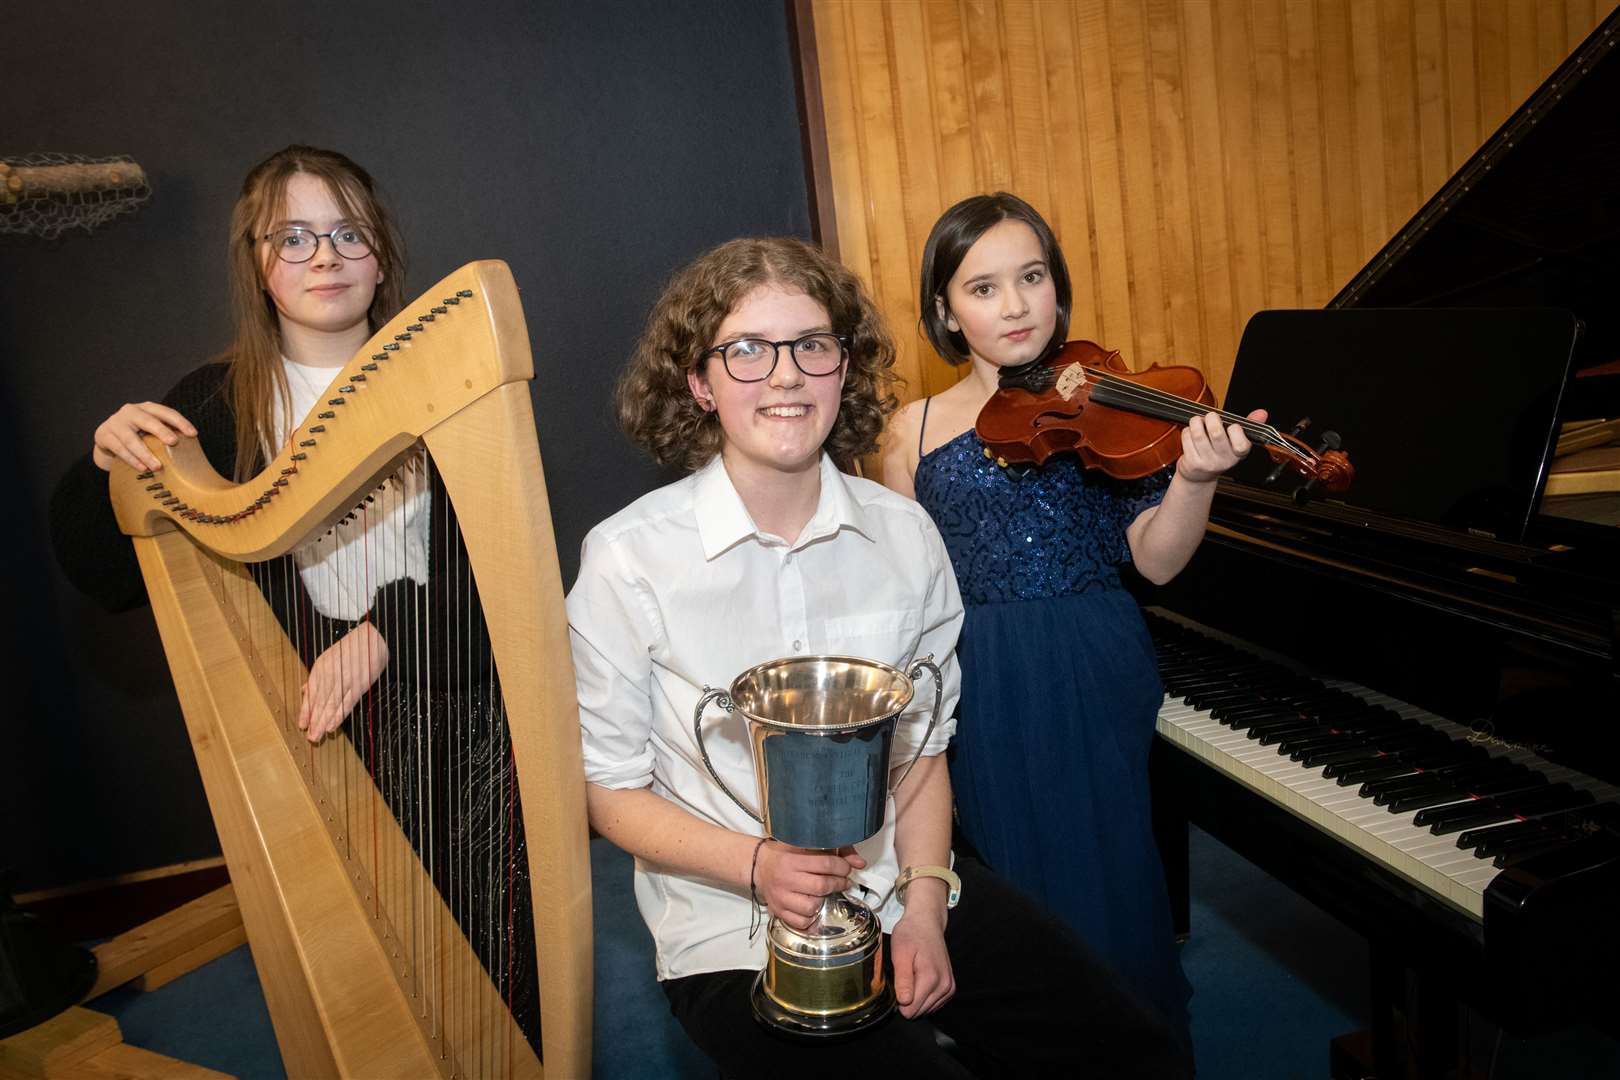 Isabelle Bremner (Inverness Royal Academy), Angela Nankivell (Dingwall Academy, winner) and Myfanwy Treacy Plain (Gordonstoun). Picture: Callum Mackay